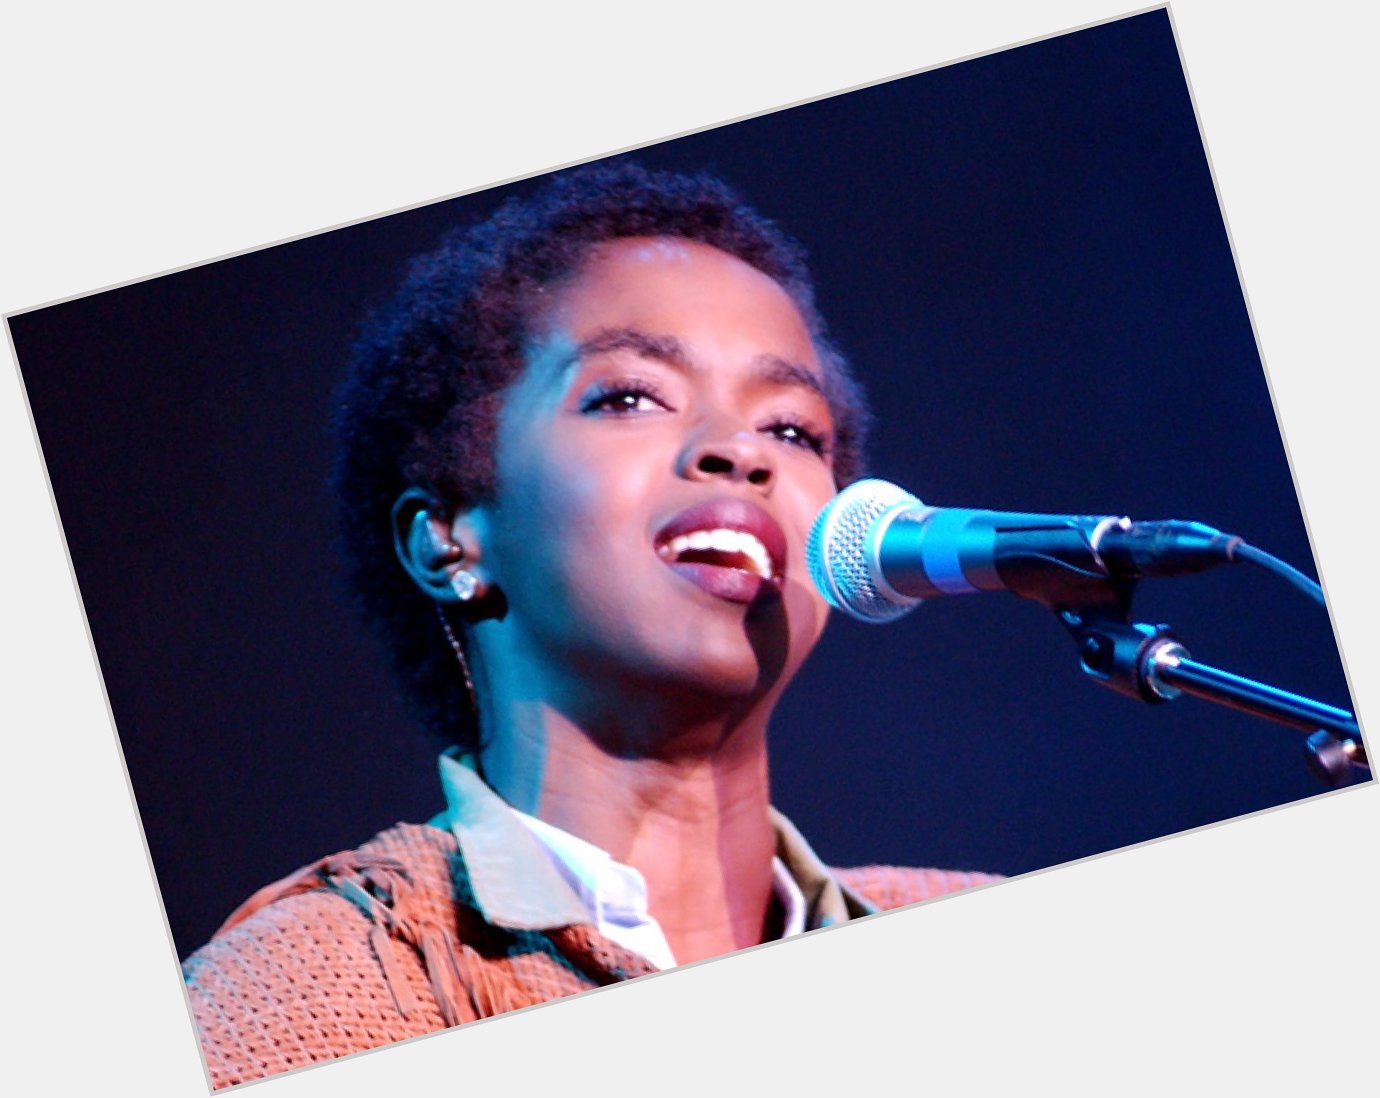 Happy Birthday Lauryn Hill and thank you for your contribution to music 